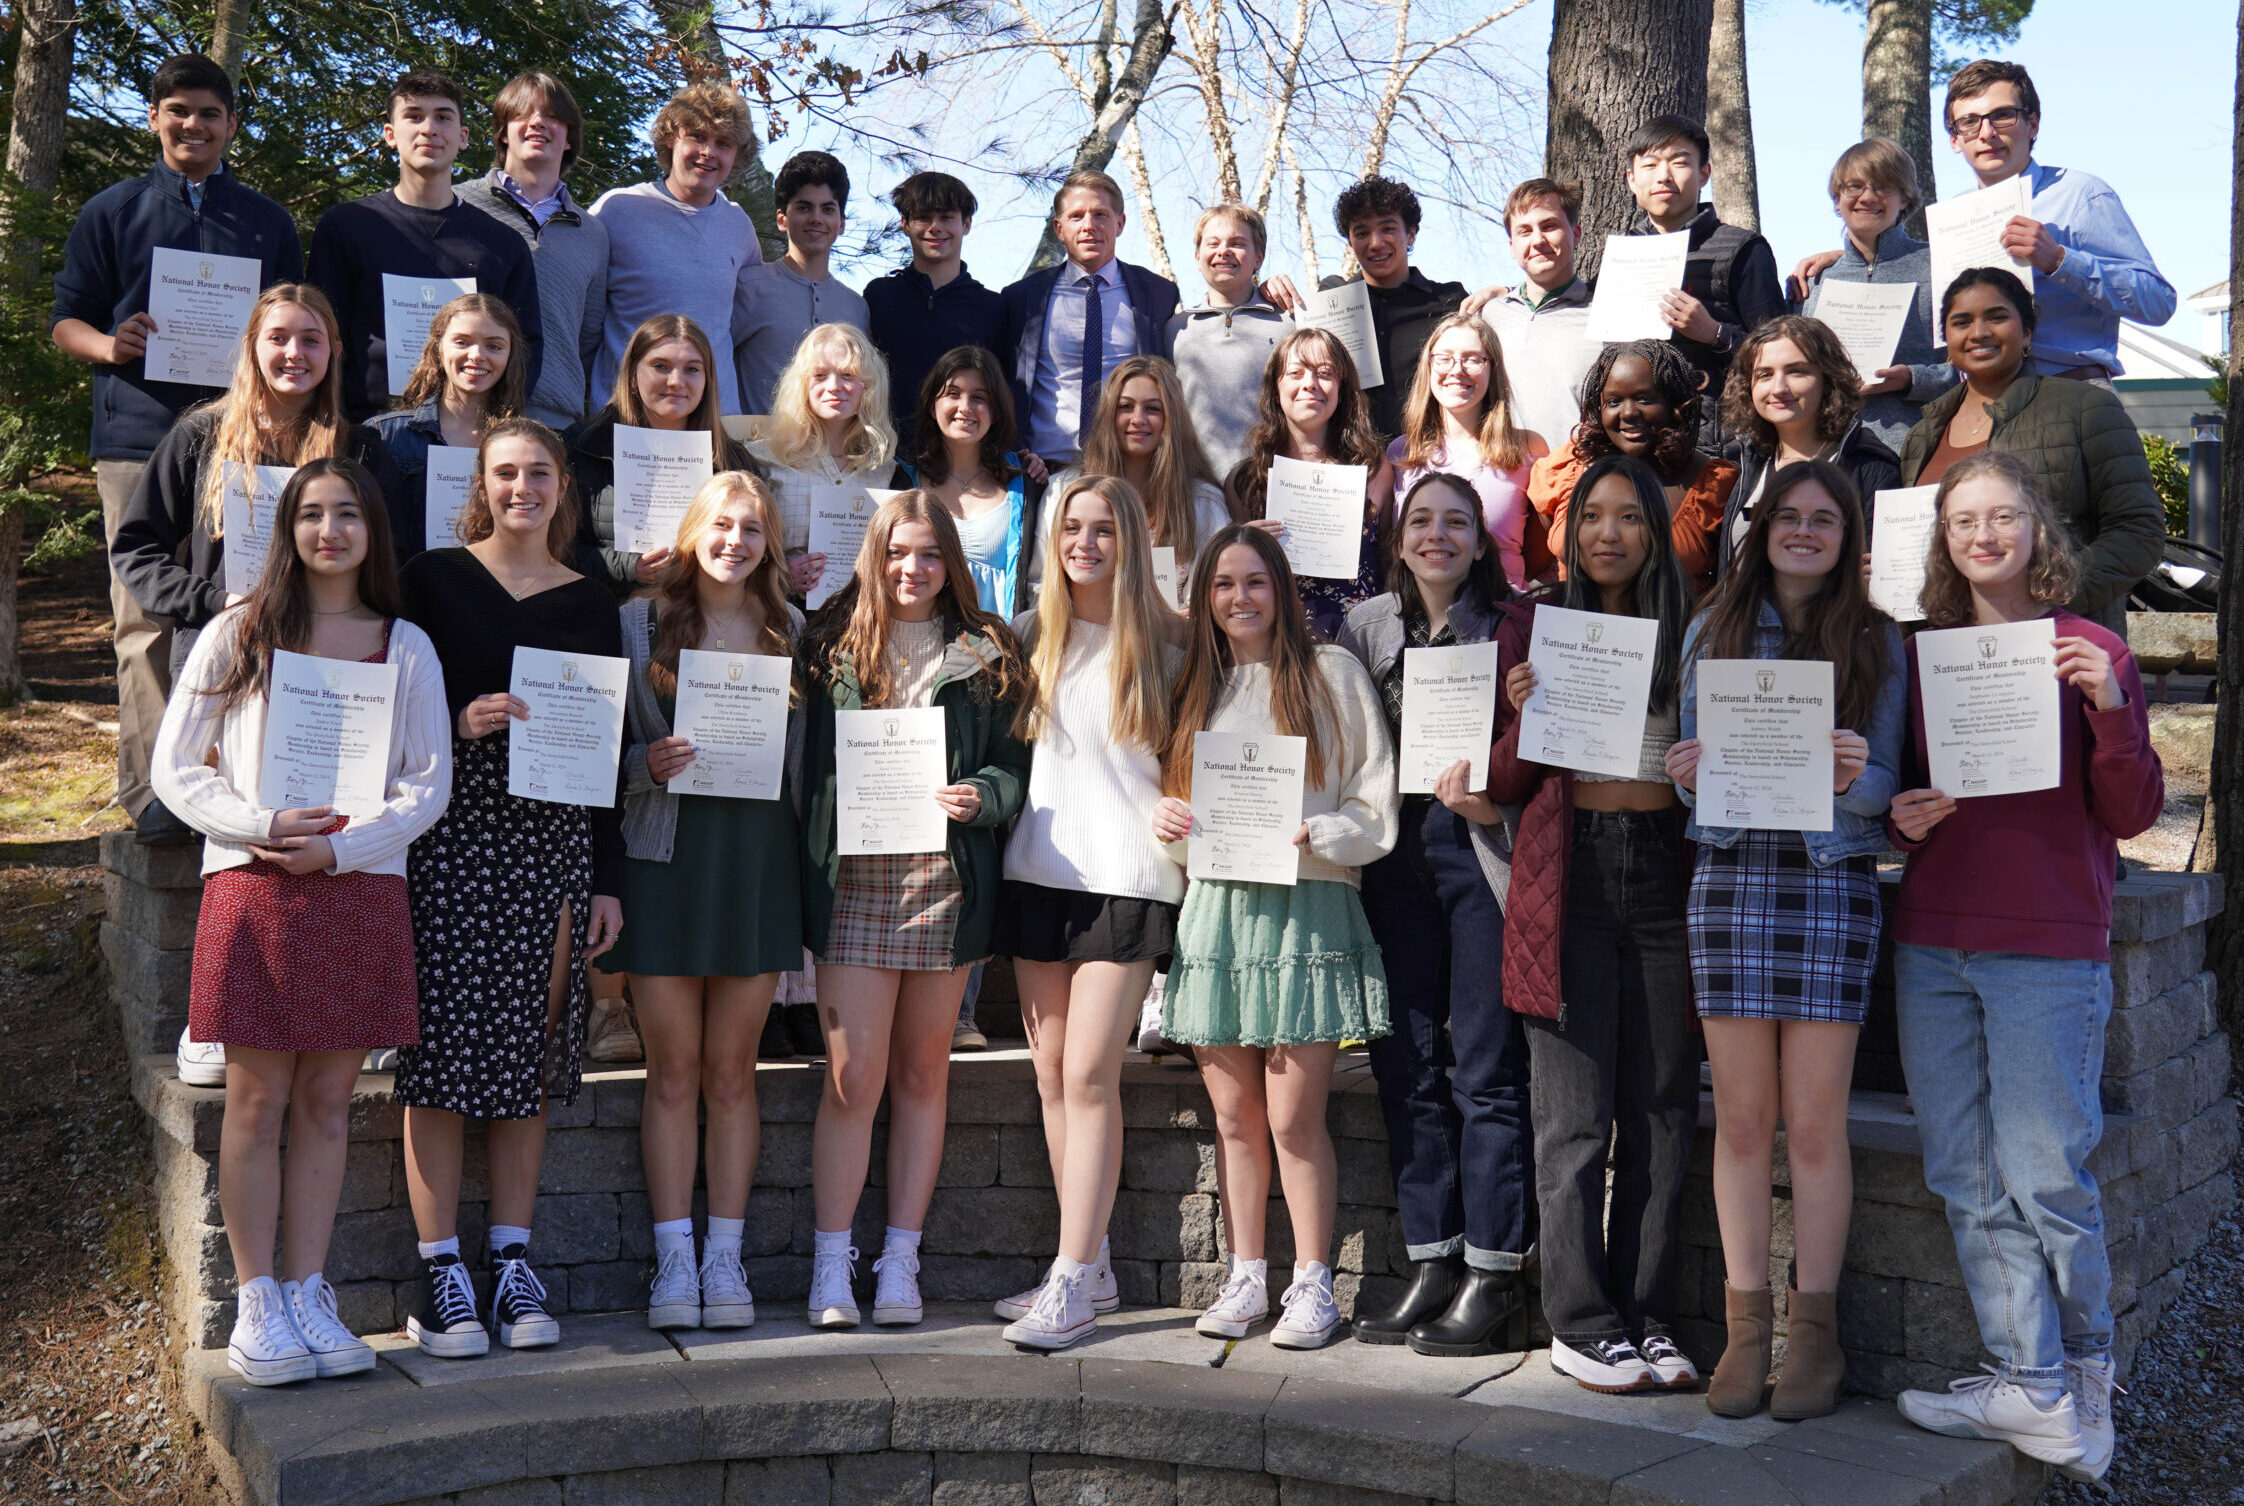 Derryfield Inducts 35 into National Honor Society